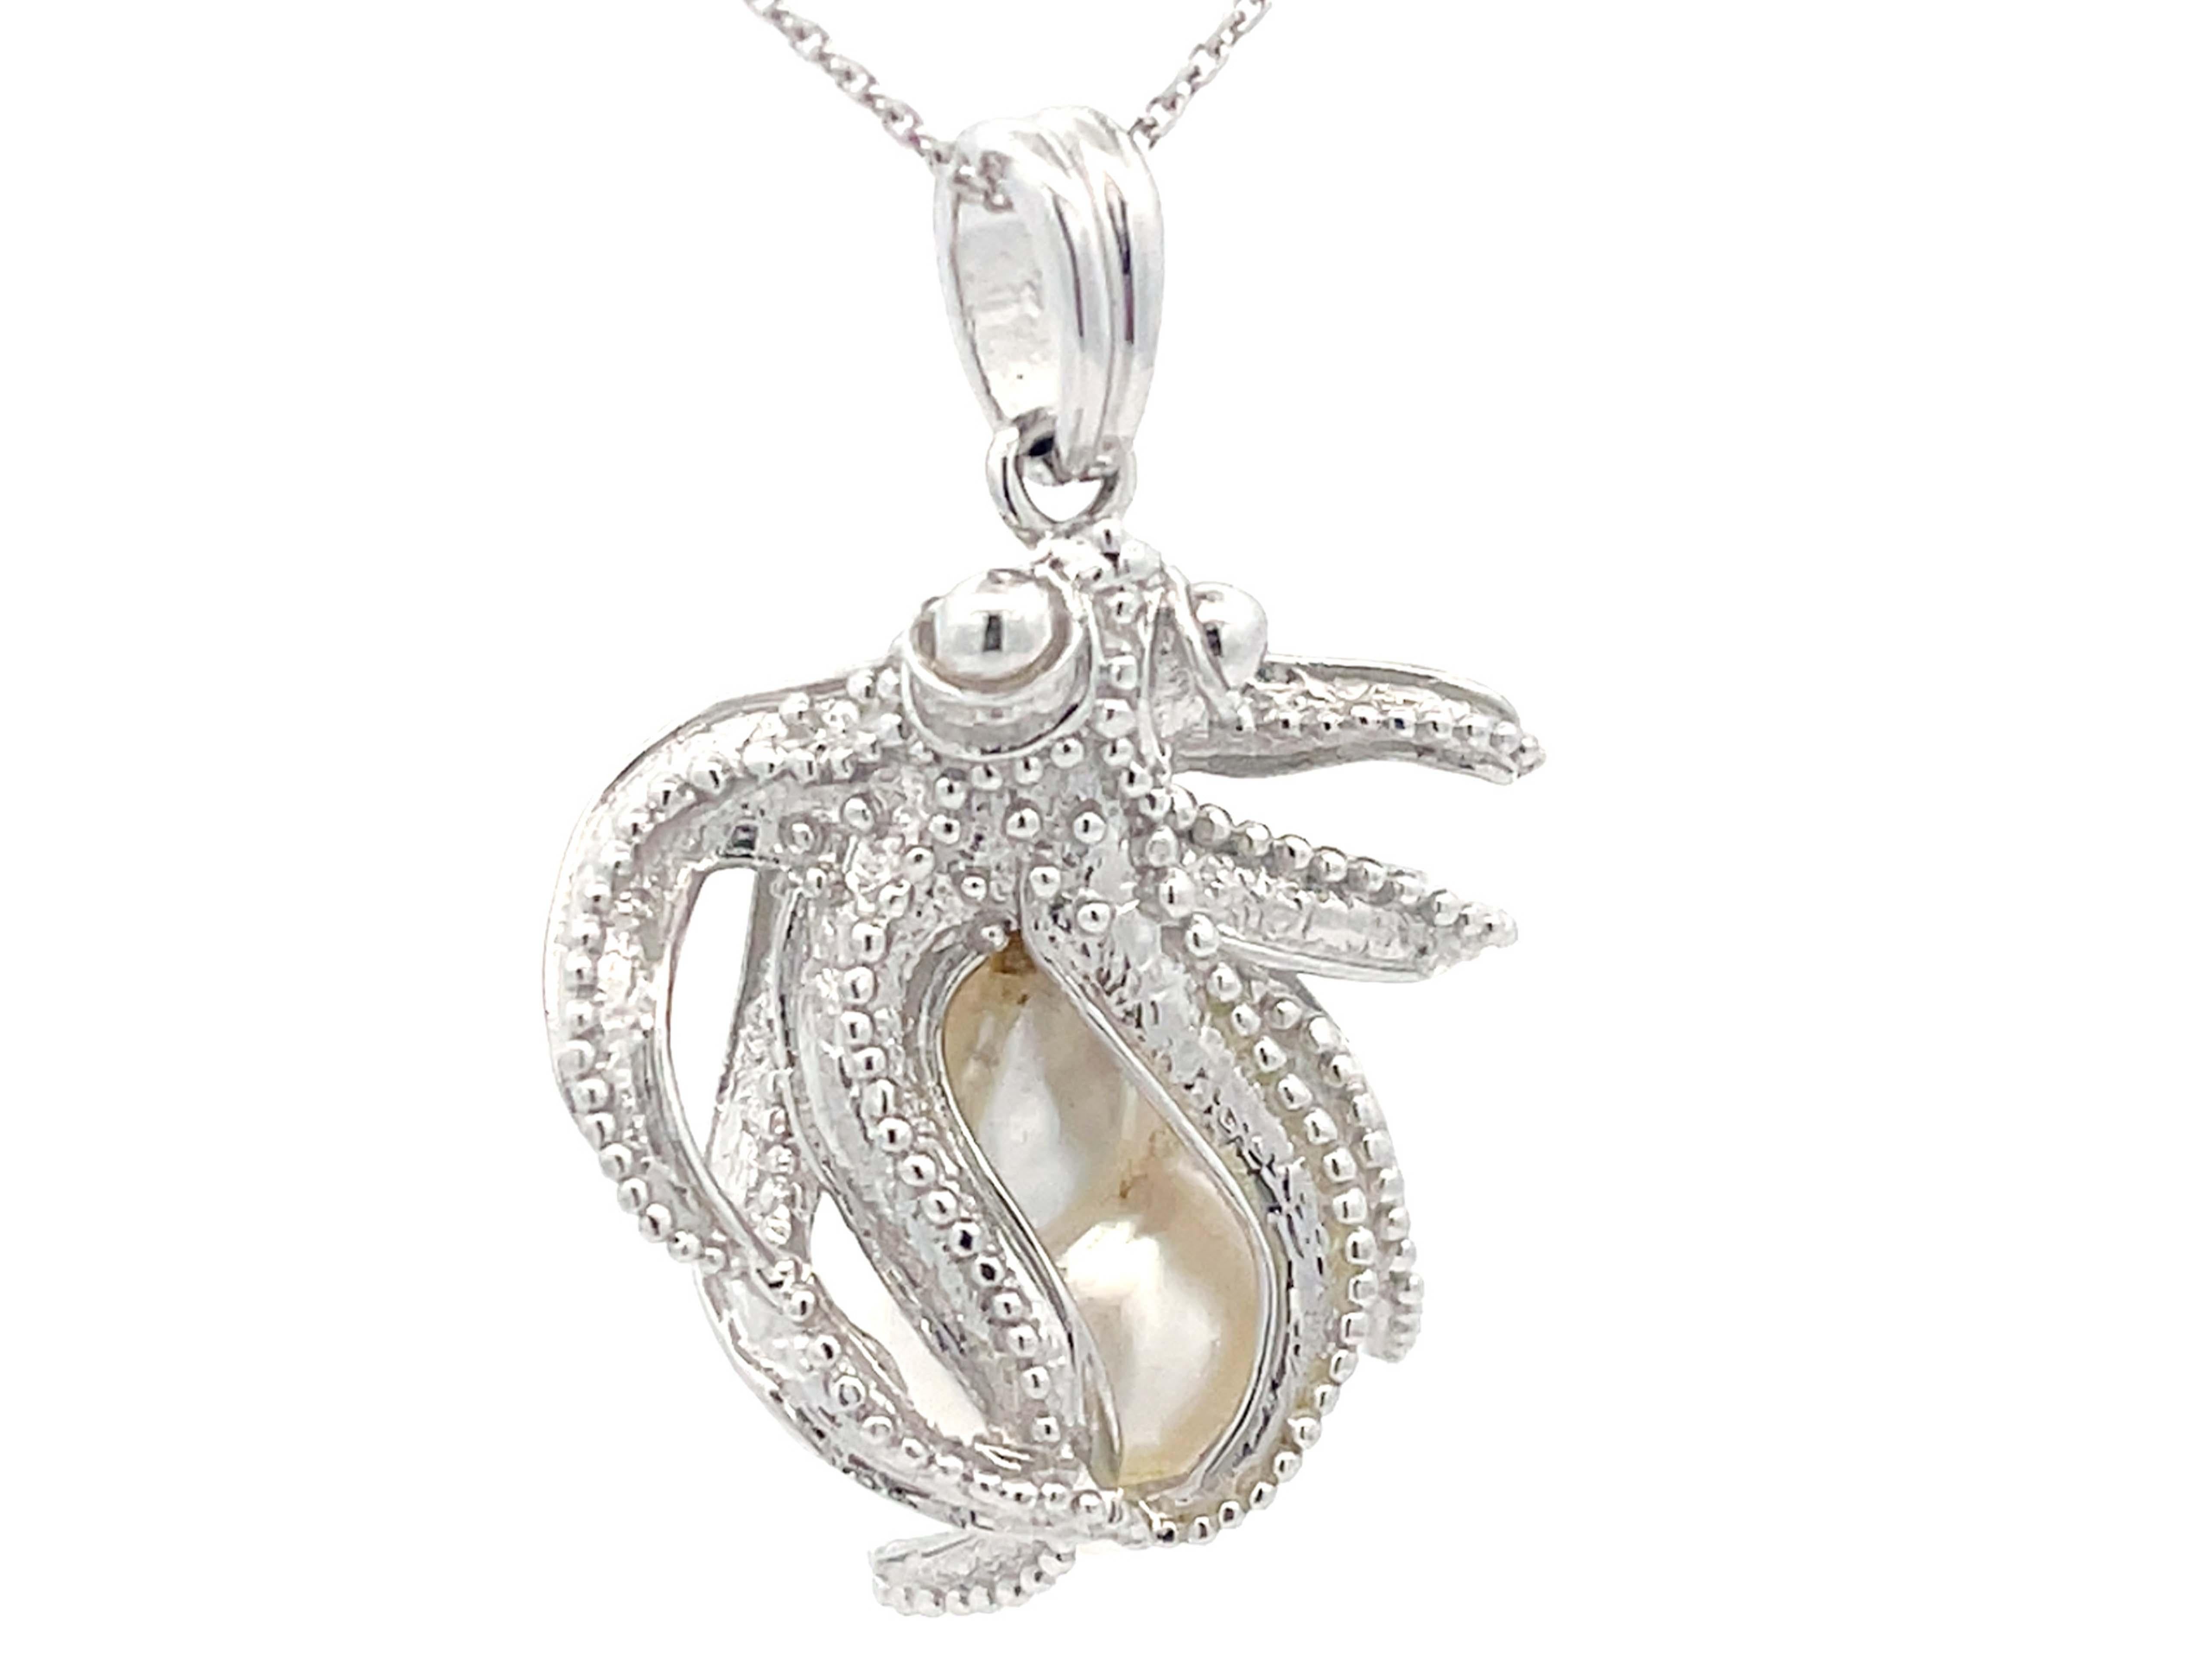 Modern Assor Gioielli Octopus Baroque Pearl Pendant on Chain in 18k White Gold For Sale